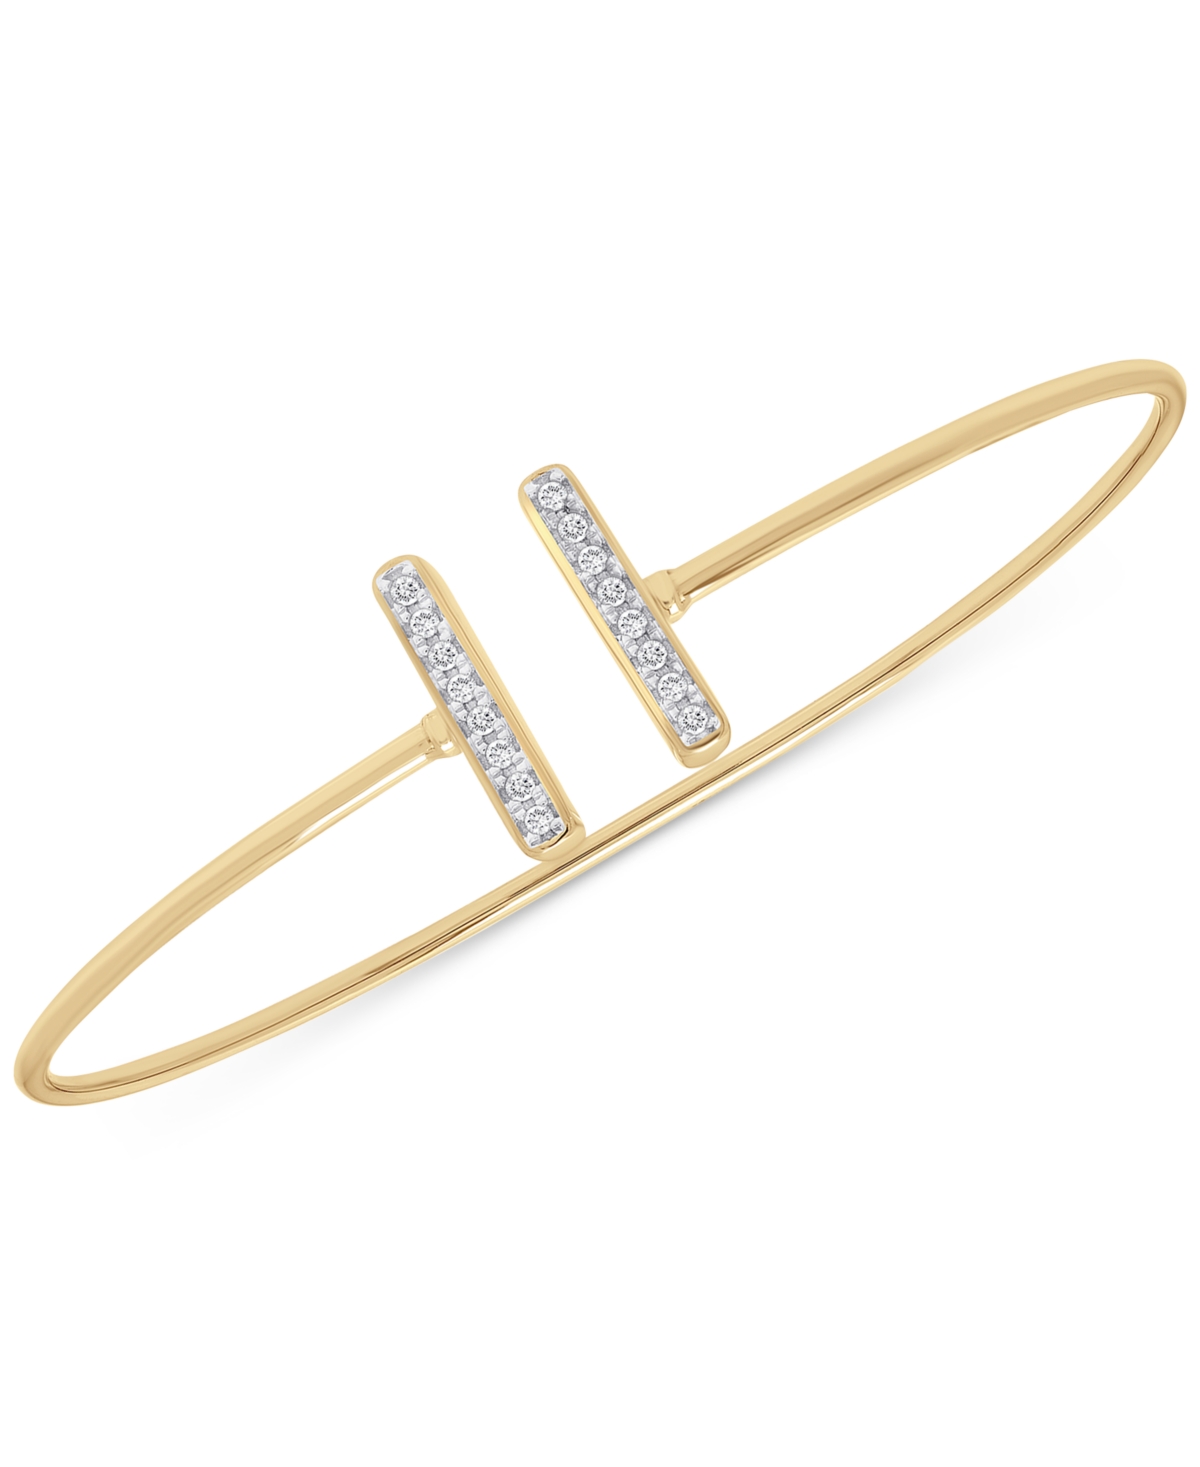 Diamond Bar Cuff Bangle Bracelet (1/10 ct. t.w.) in 14k Gold, Created for Macy's - Yellow Gold